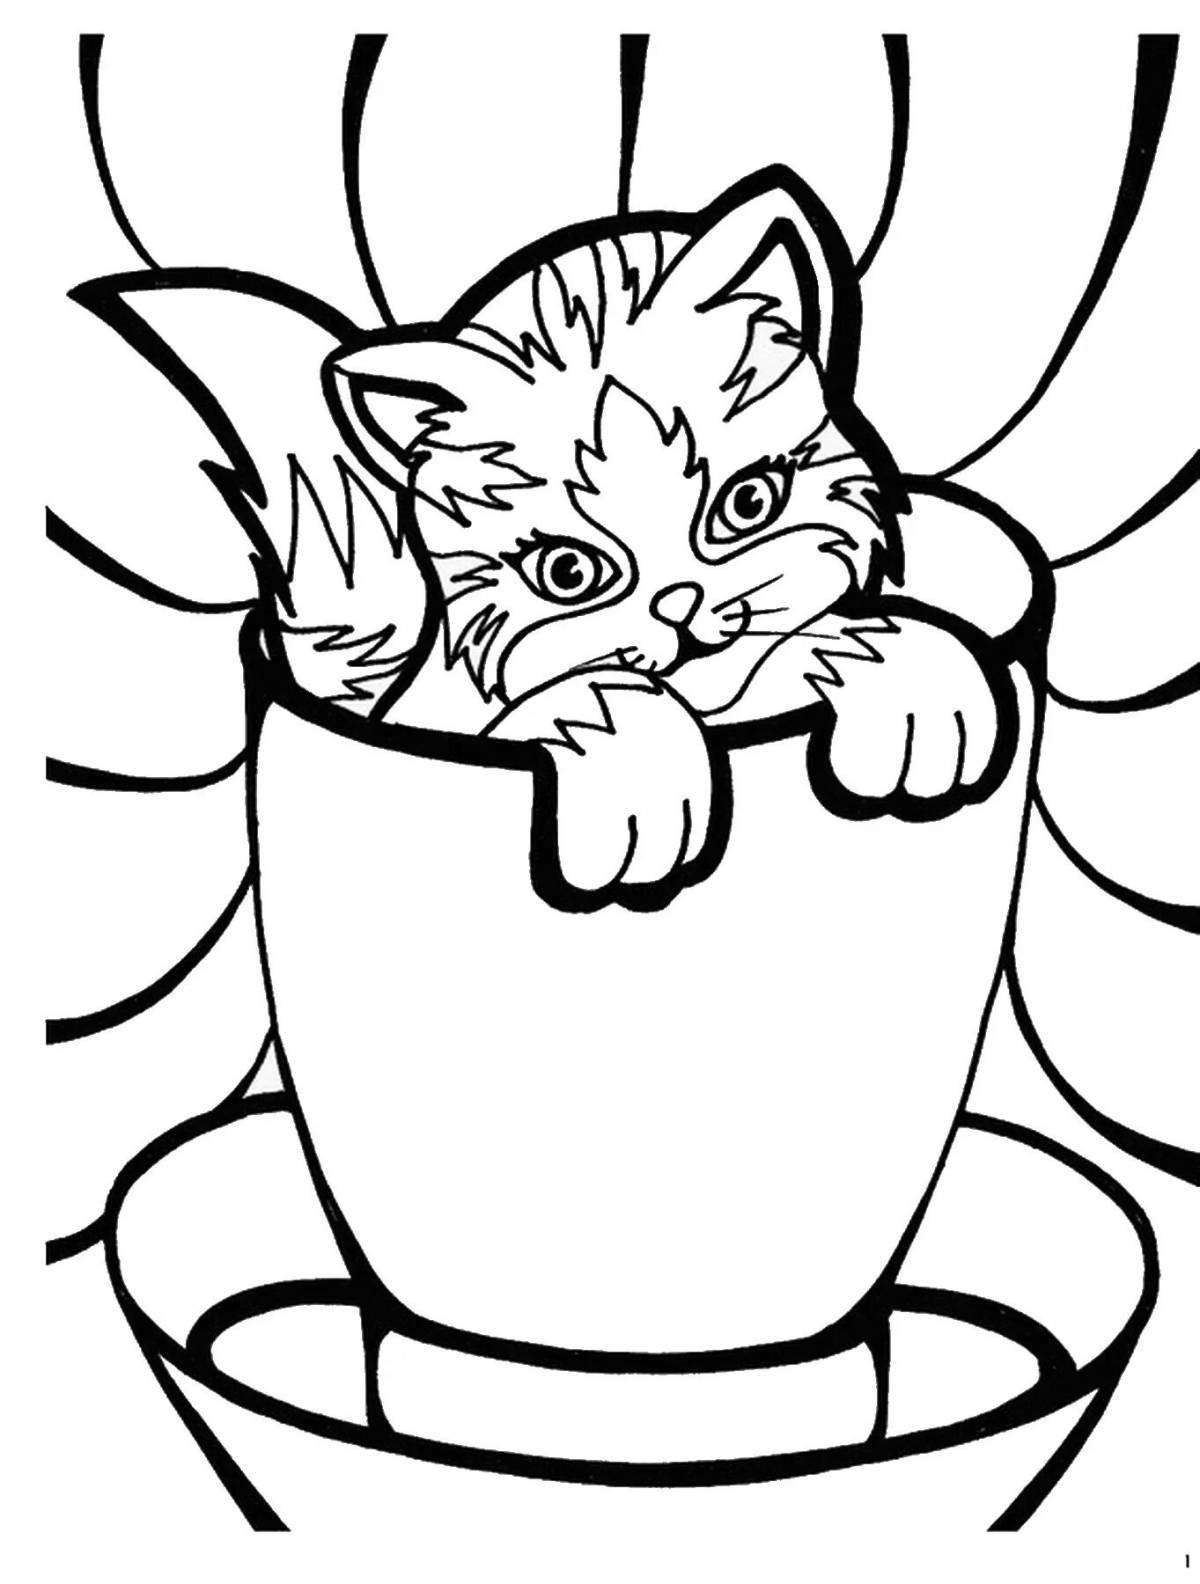 Coloring book precious kitten in a cup